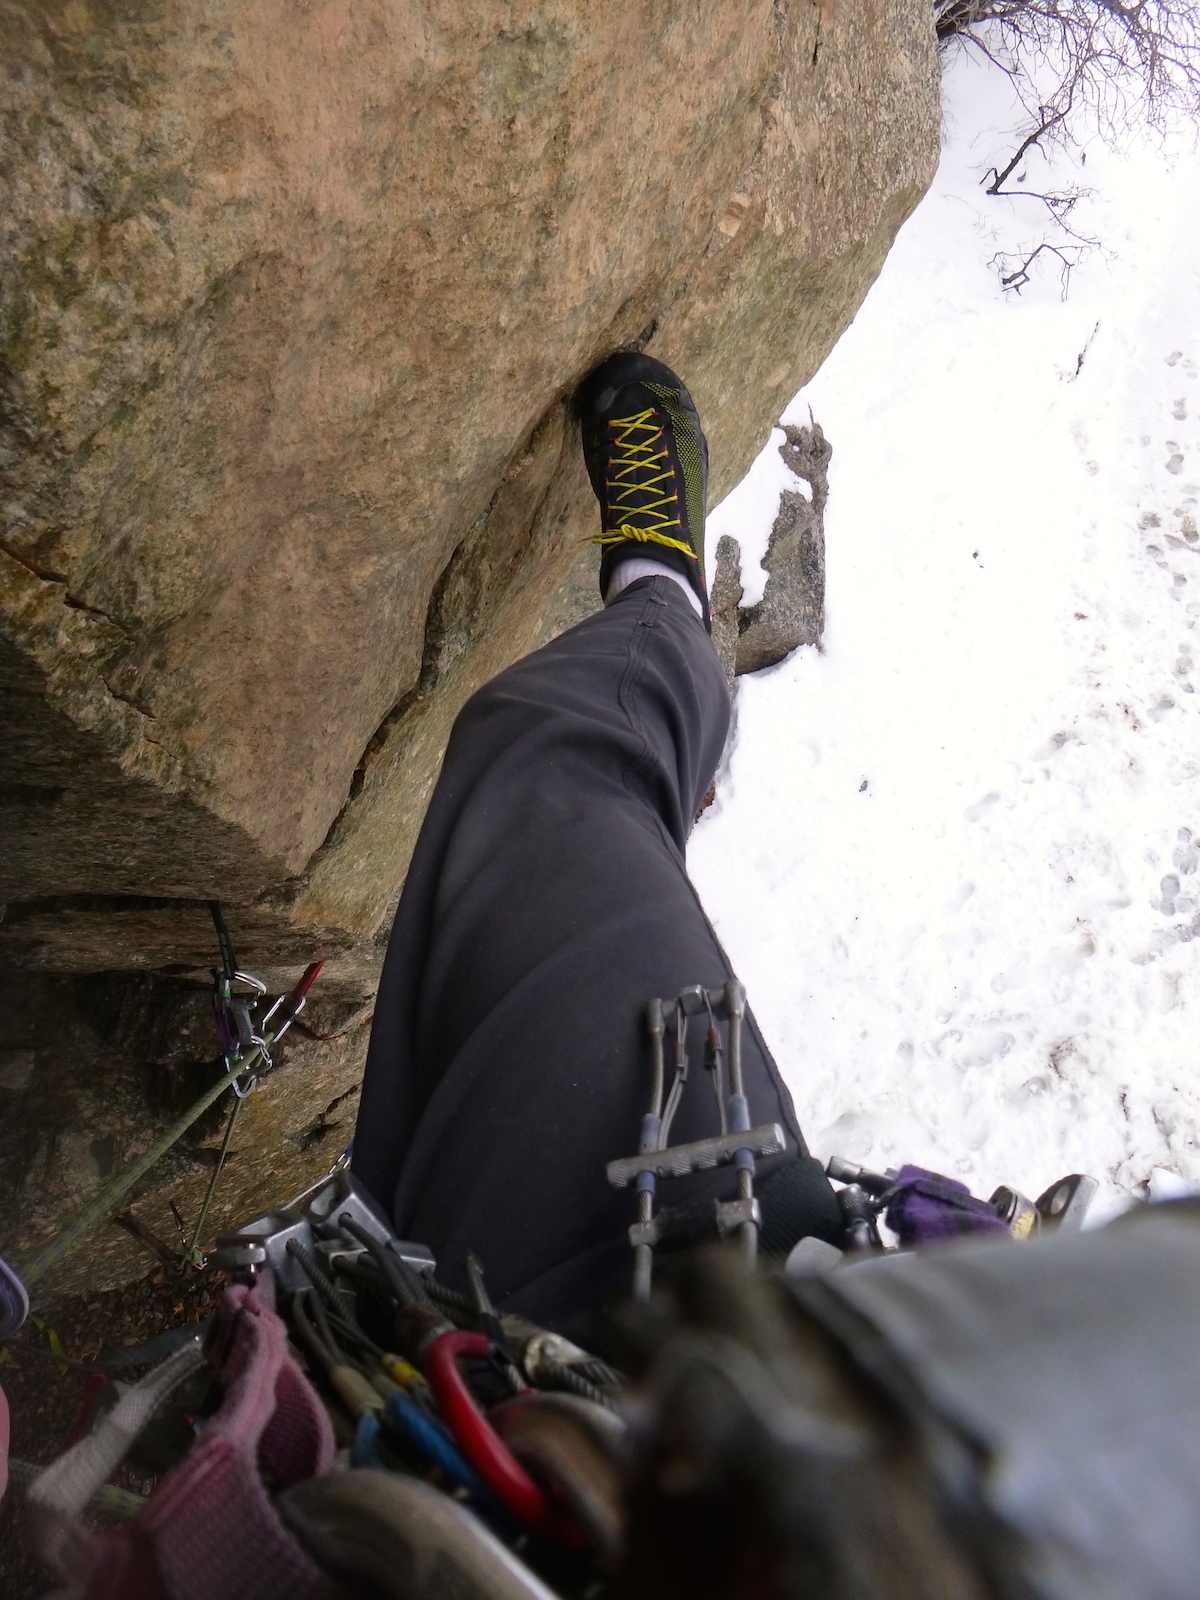 The La Sportiva TX2 shoes performed well on this wet, overhanging pitch in the Glenwood Canyon, Colorado, which entailed aid and free climbing (5.6 C1+). [Photo] Derek Franz